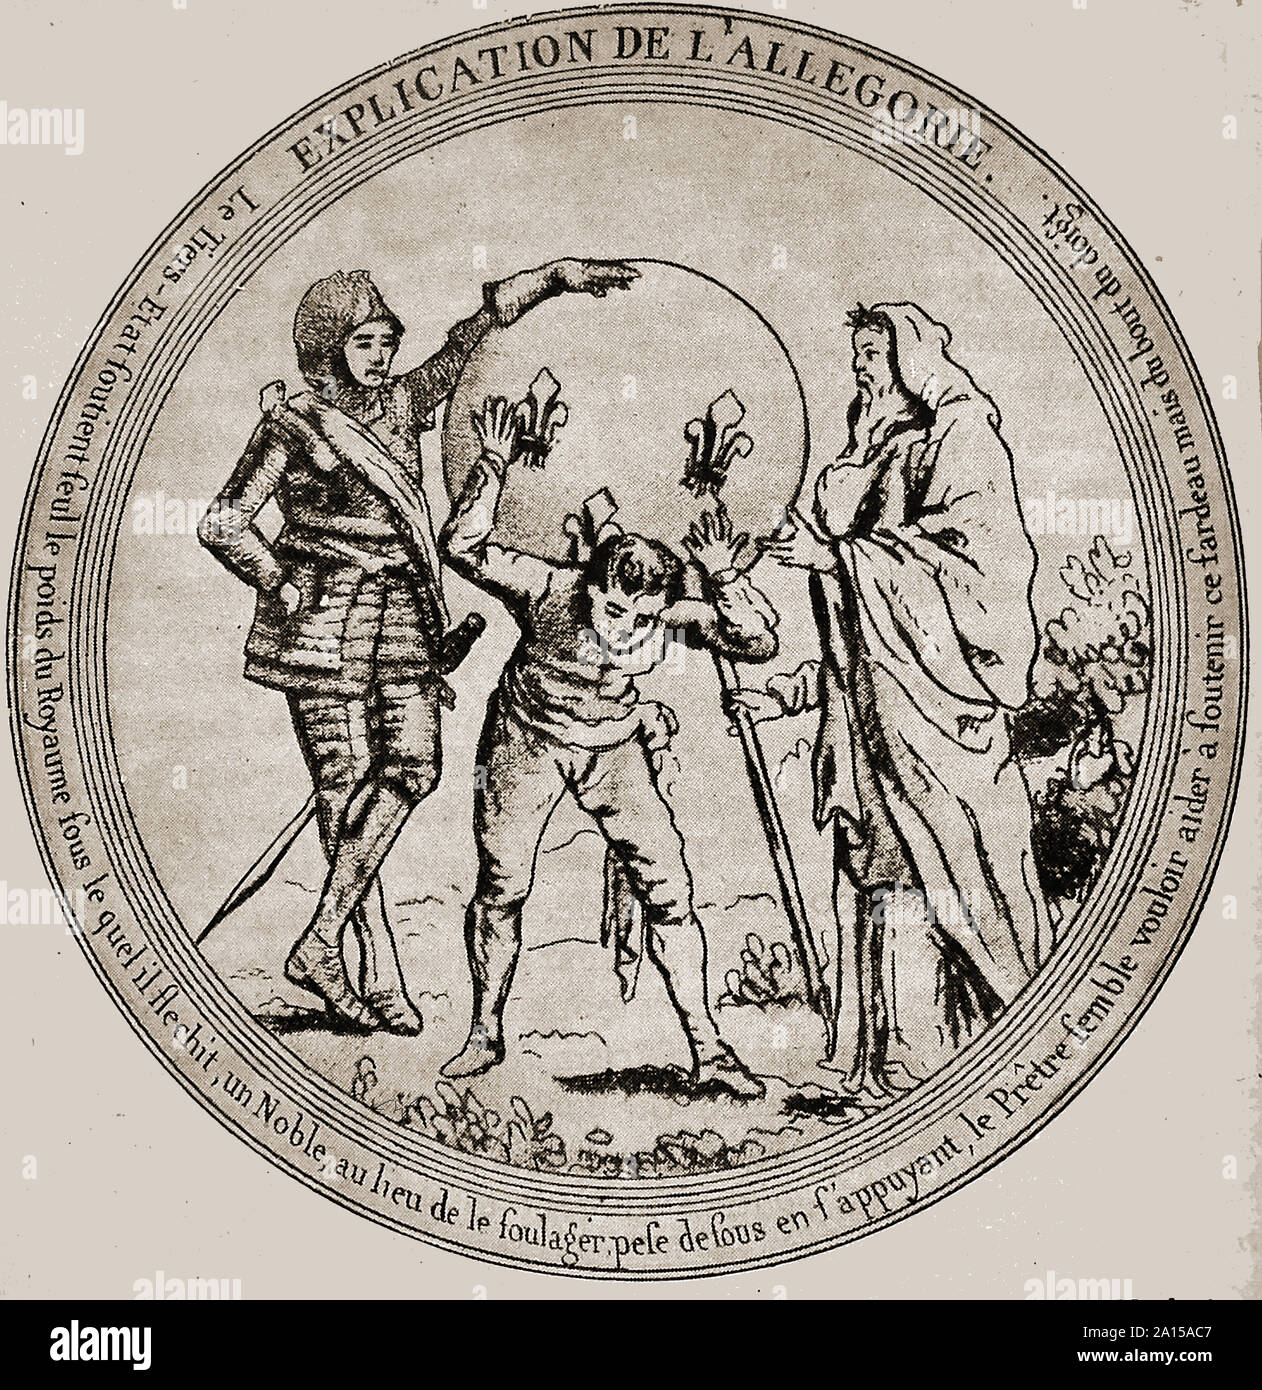 An early French political allegorical cartoon portraying the French Revolution. The peasant is supporting all of France's troubles  on his shoulders whilst the clergy lends support to him  with a single finger. The aristocracy are leaning on his load making his struggle even harder. Stock Photo